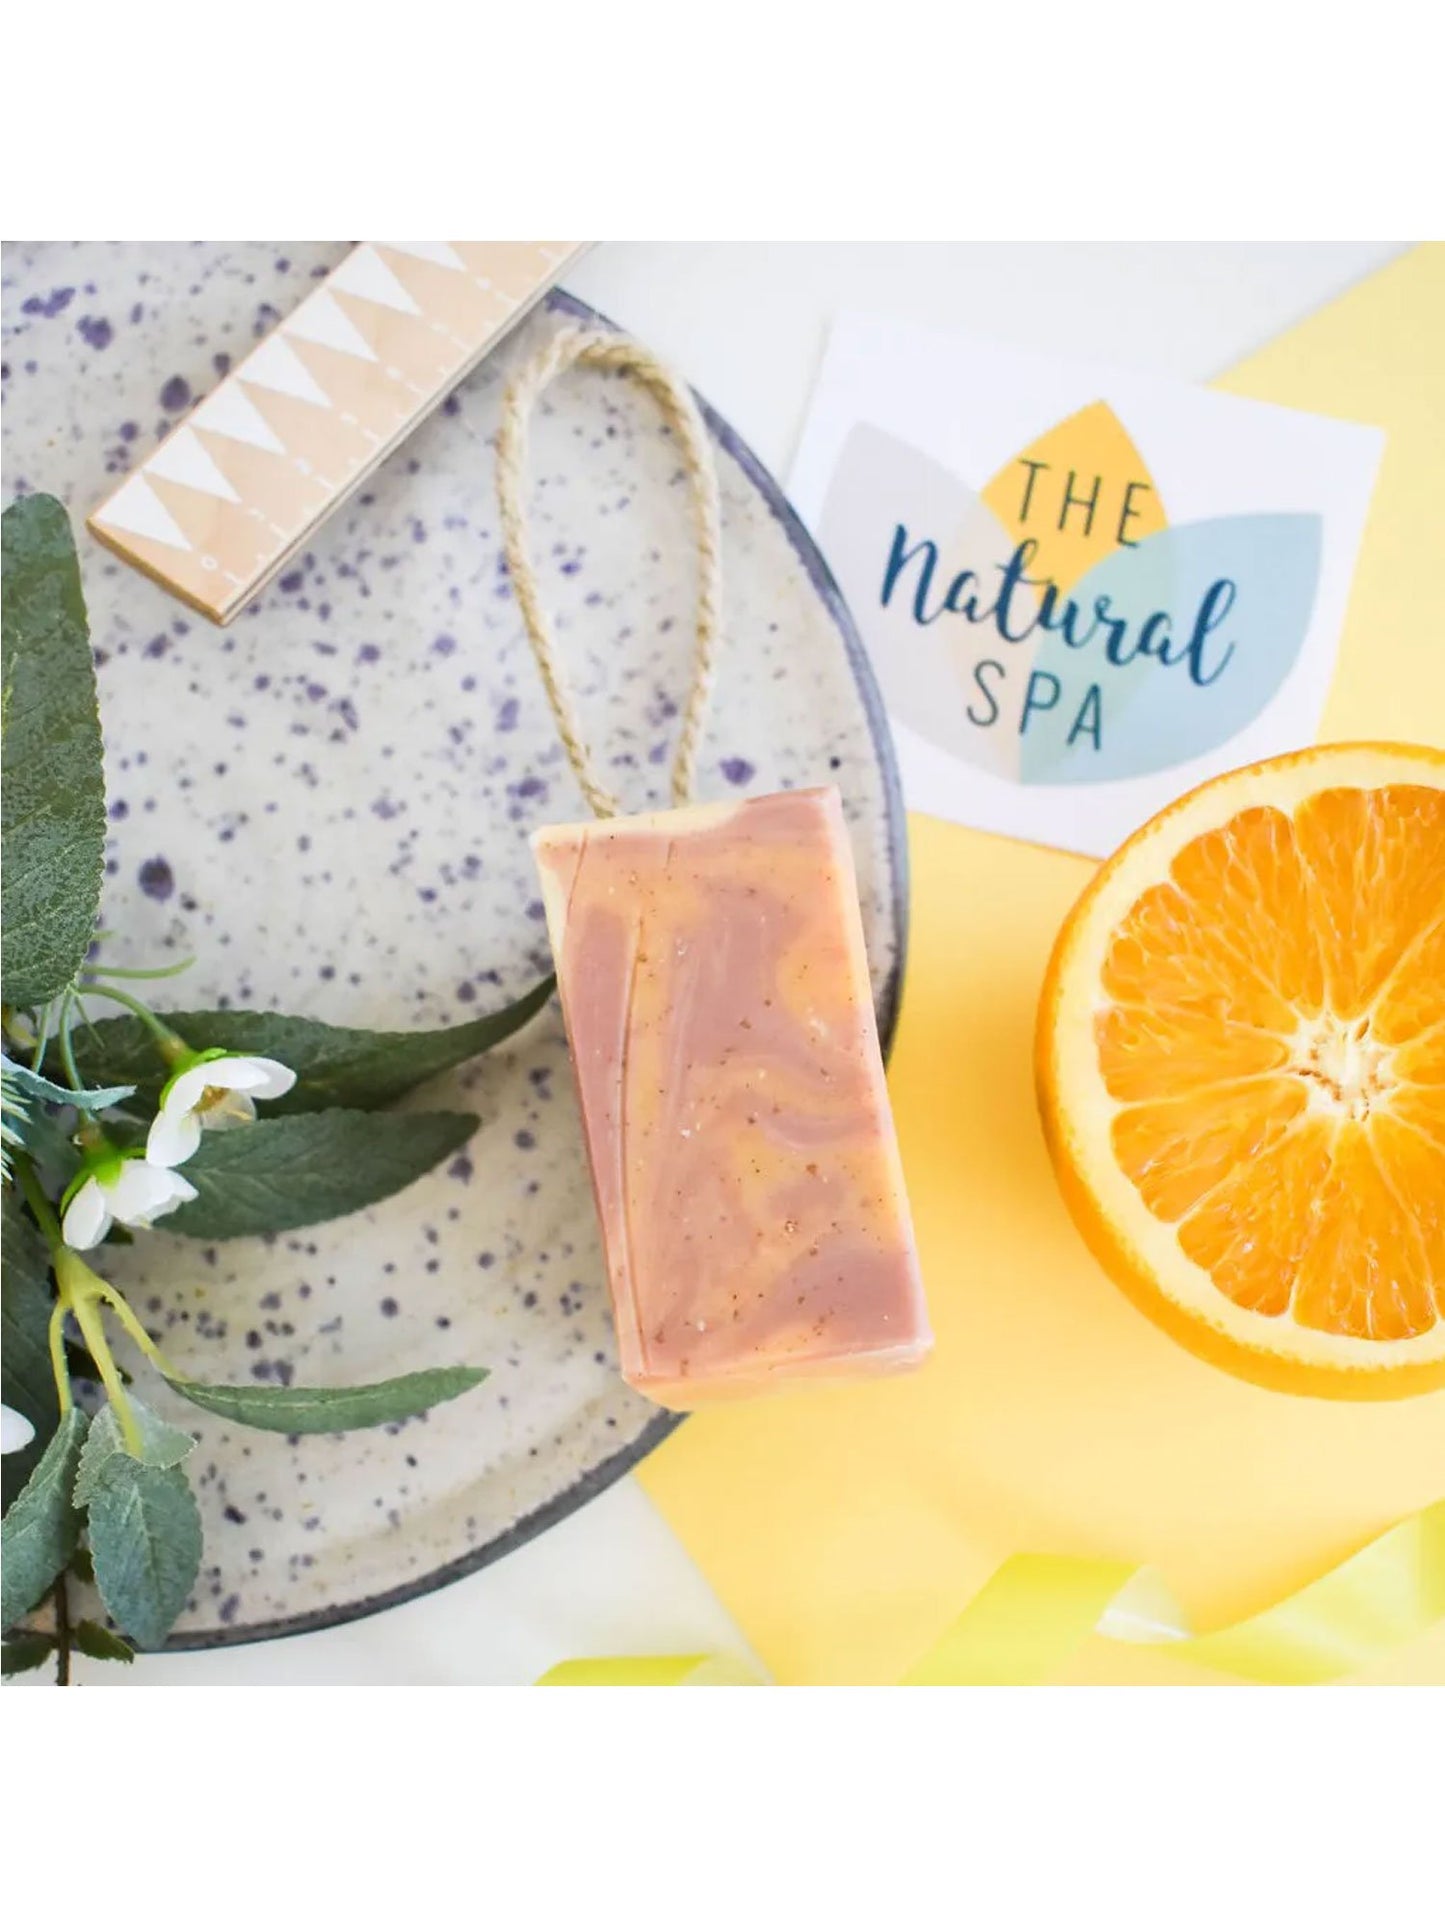 The Natural Spa Cosmetics Citrus Blossom Soap On A Rope